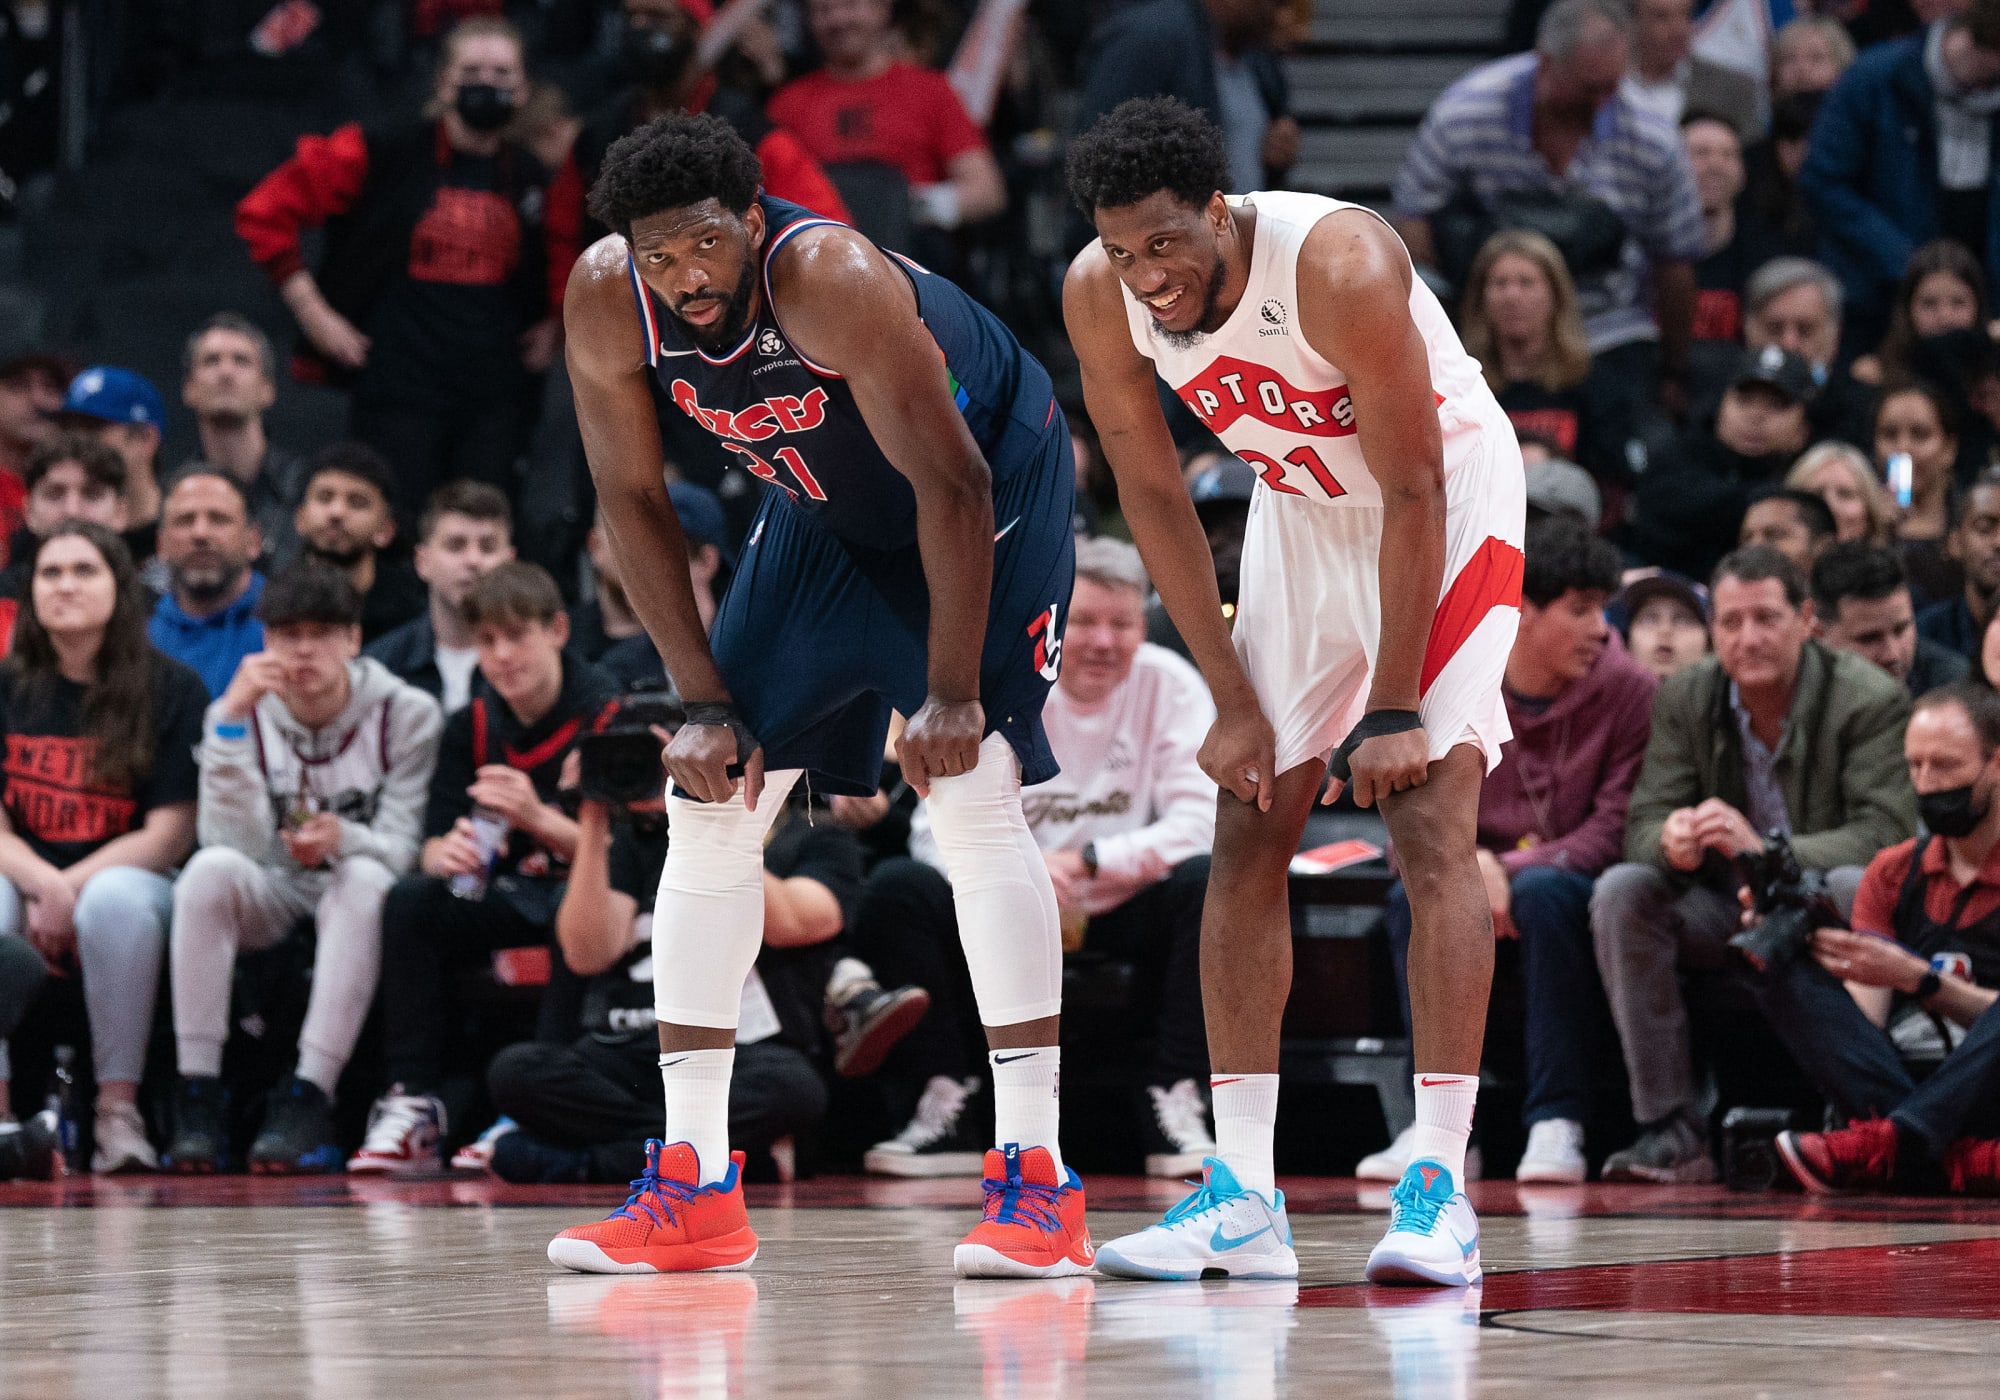 Thad Young has earned multi-year Raptors contract in playoffs